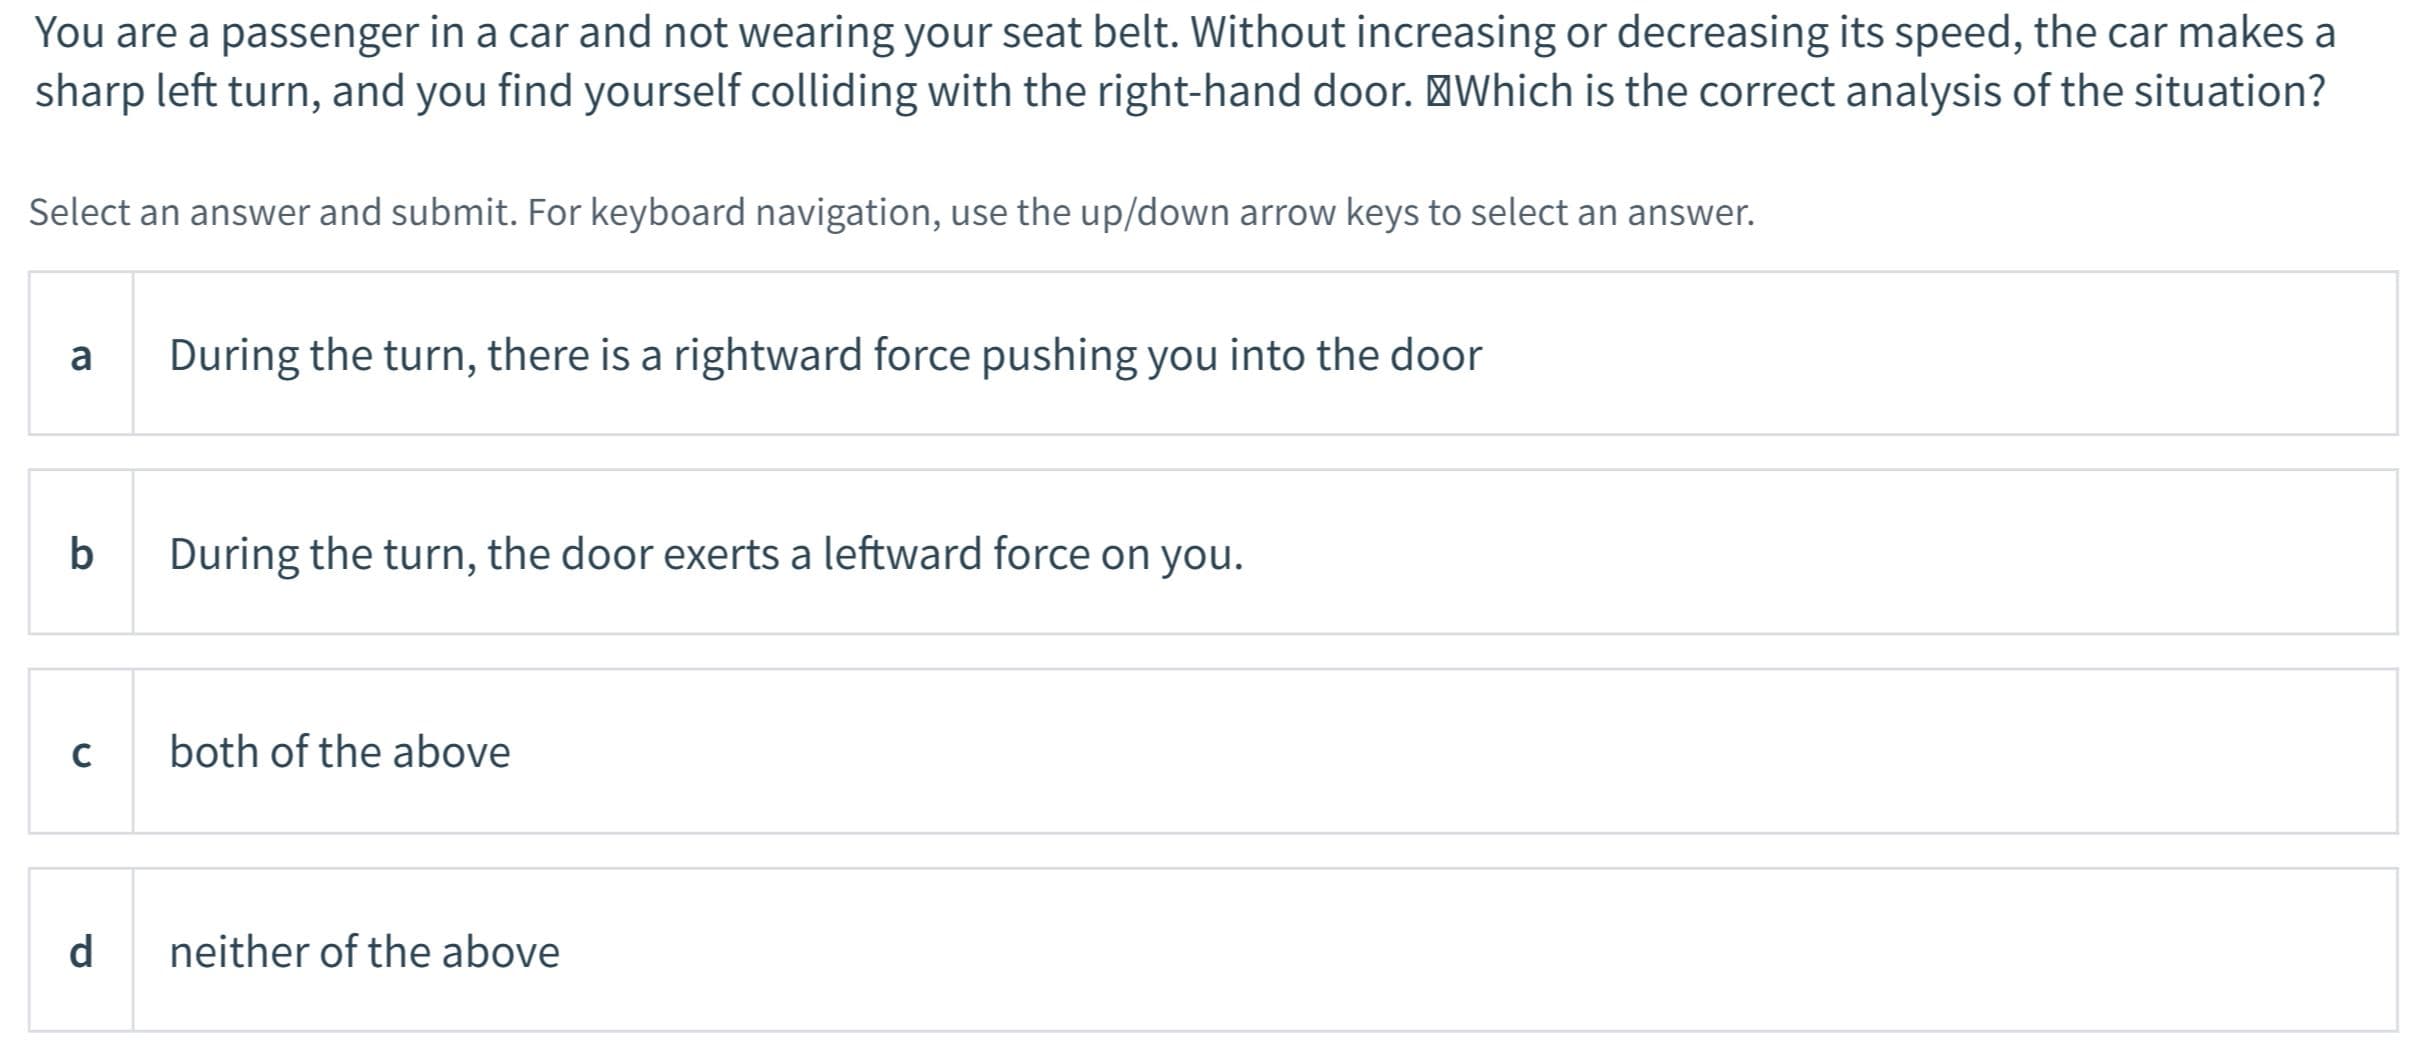 You are a passenger in a car and not wearing your seat belt. Without increasing or decreasing its speed, the car makes a
sharp left turn, and you find yourself colliding with the right-hand door. 'Which is the correct analysis of the situation?
Select an answer and submit. For keyboard navigation, use the up/down arrow keys to select an answer.
a
During the turn, there is a rightward force pushing you into the door
b
During the turn, the door exerts a leftward force on you.
C
both of the above
d
neither of the above
